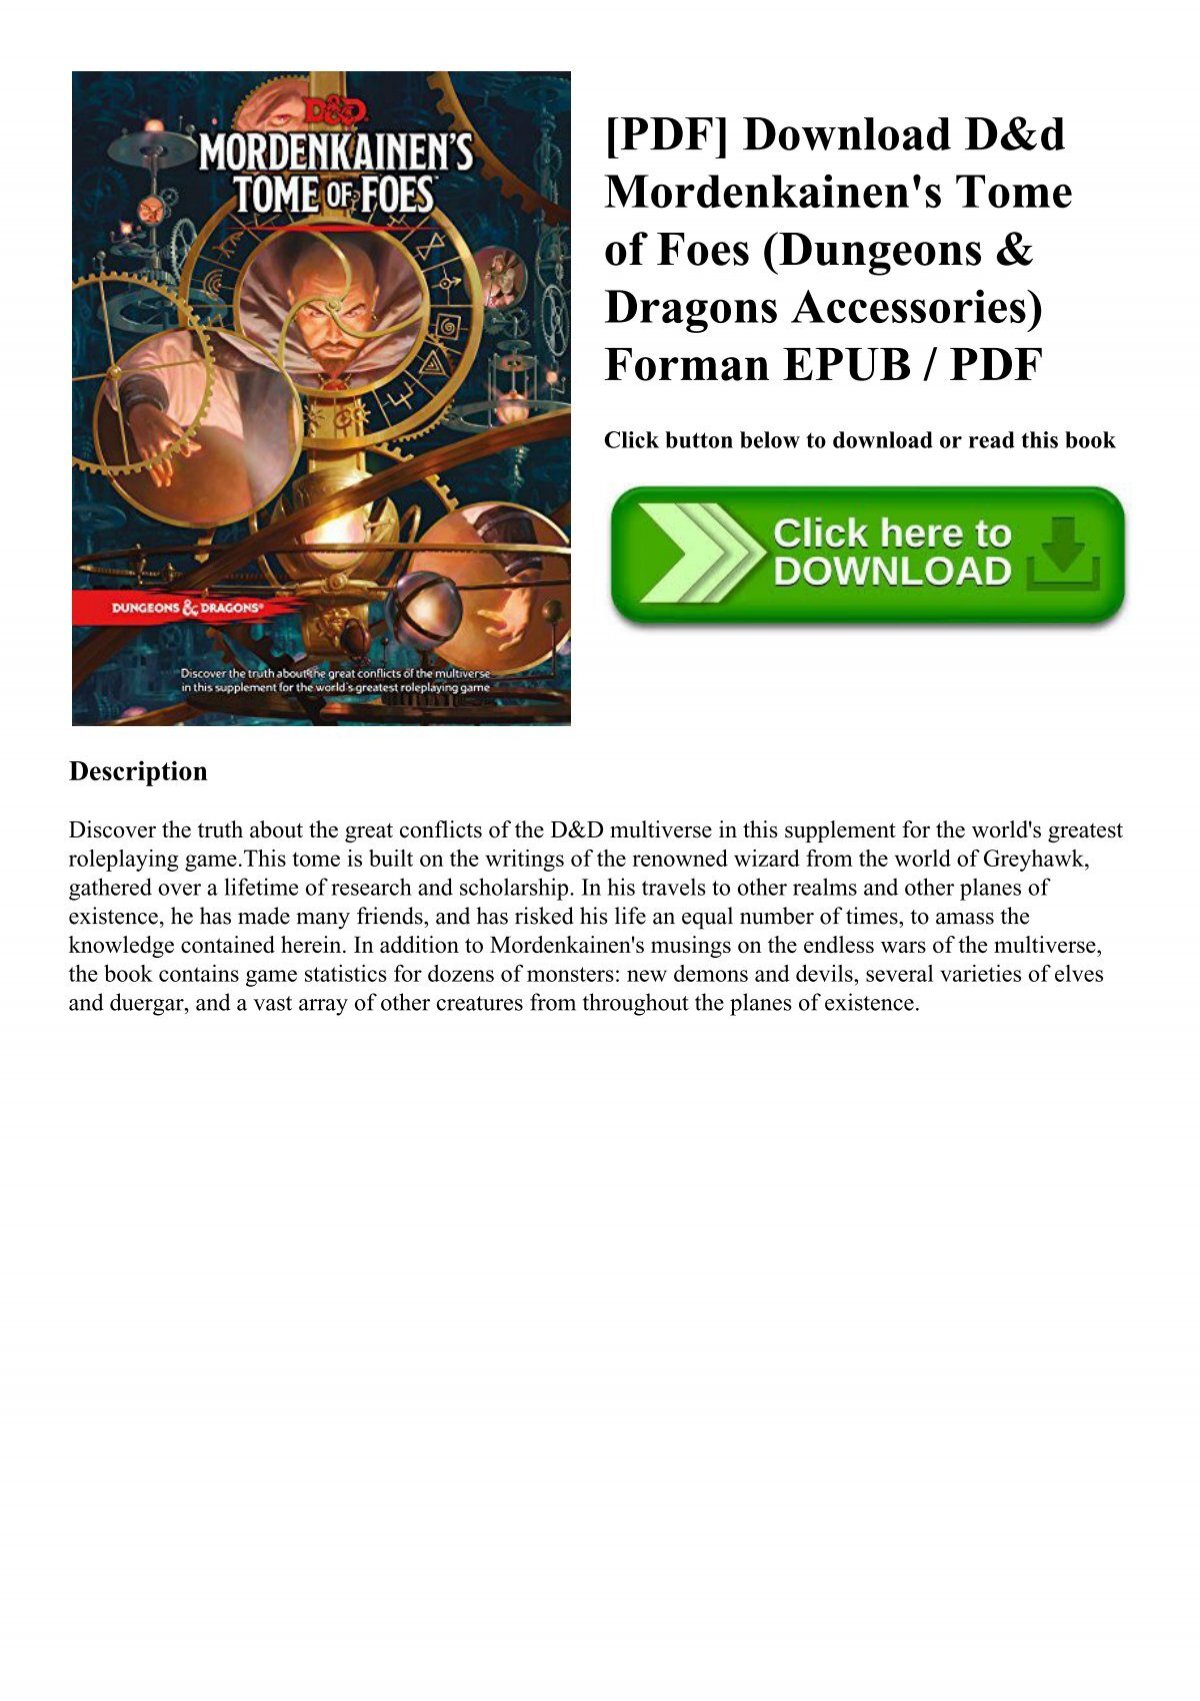 PDF] Download D&amp;d Mordenkainen's Tome of Foes (Dungeons &amp; Dragons  Accessories) Forman EPUB PDF